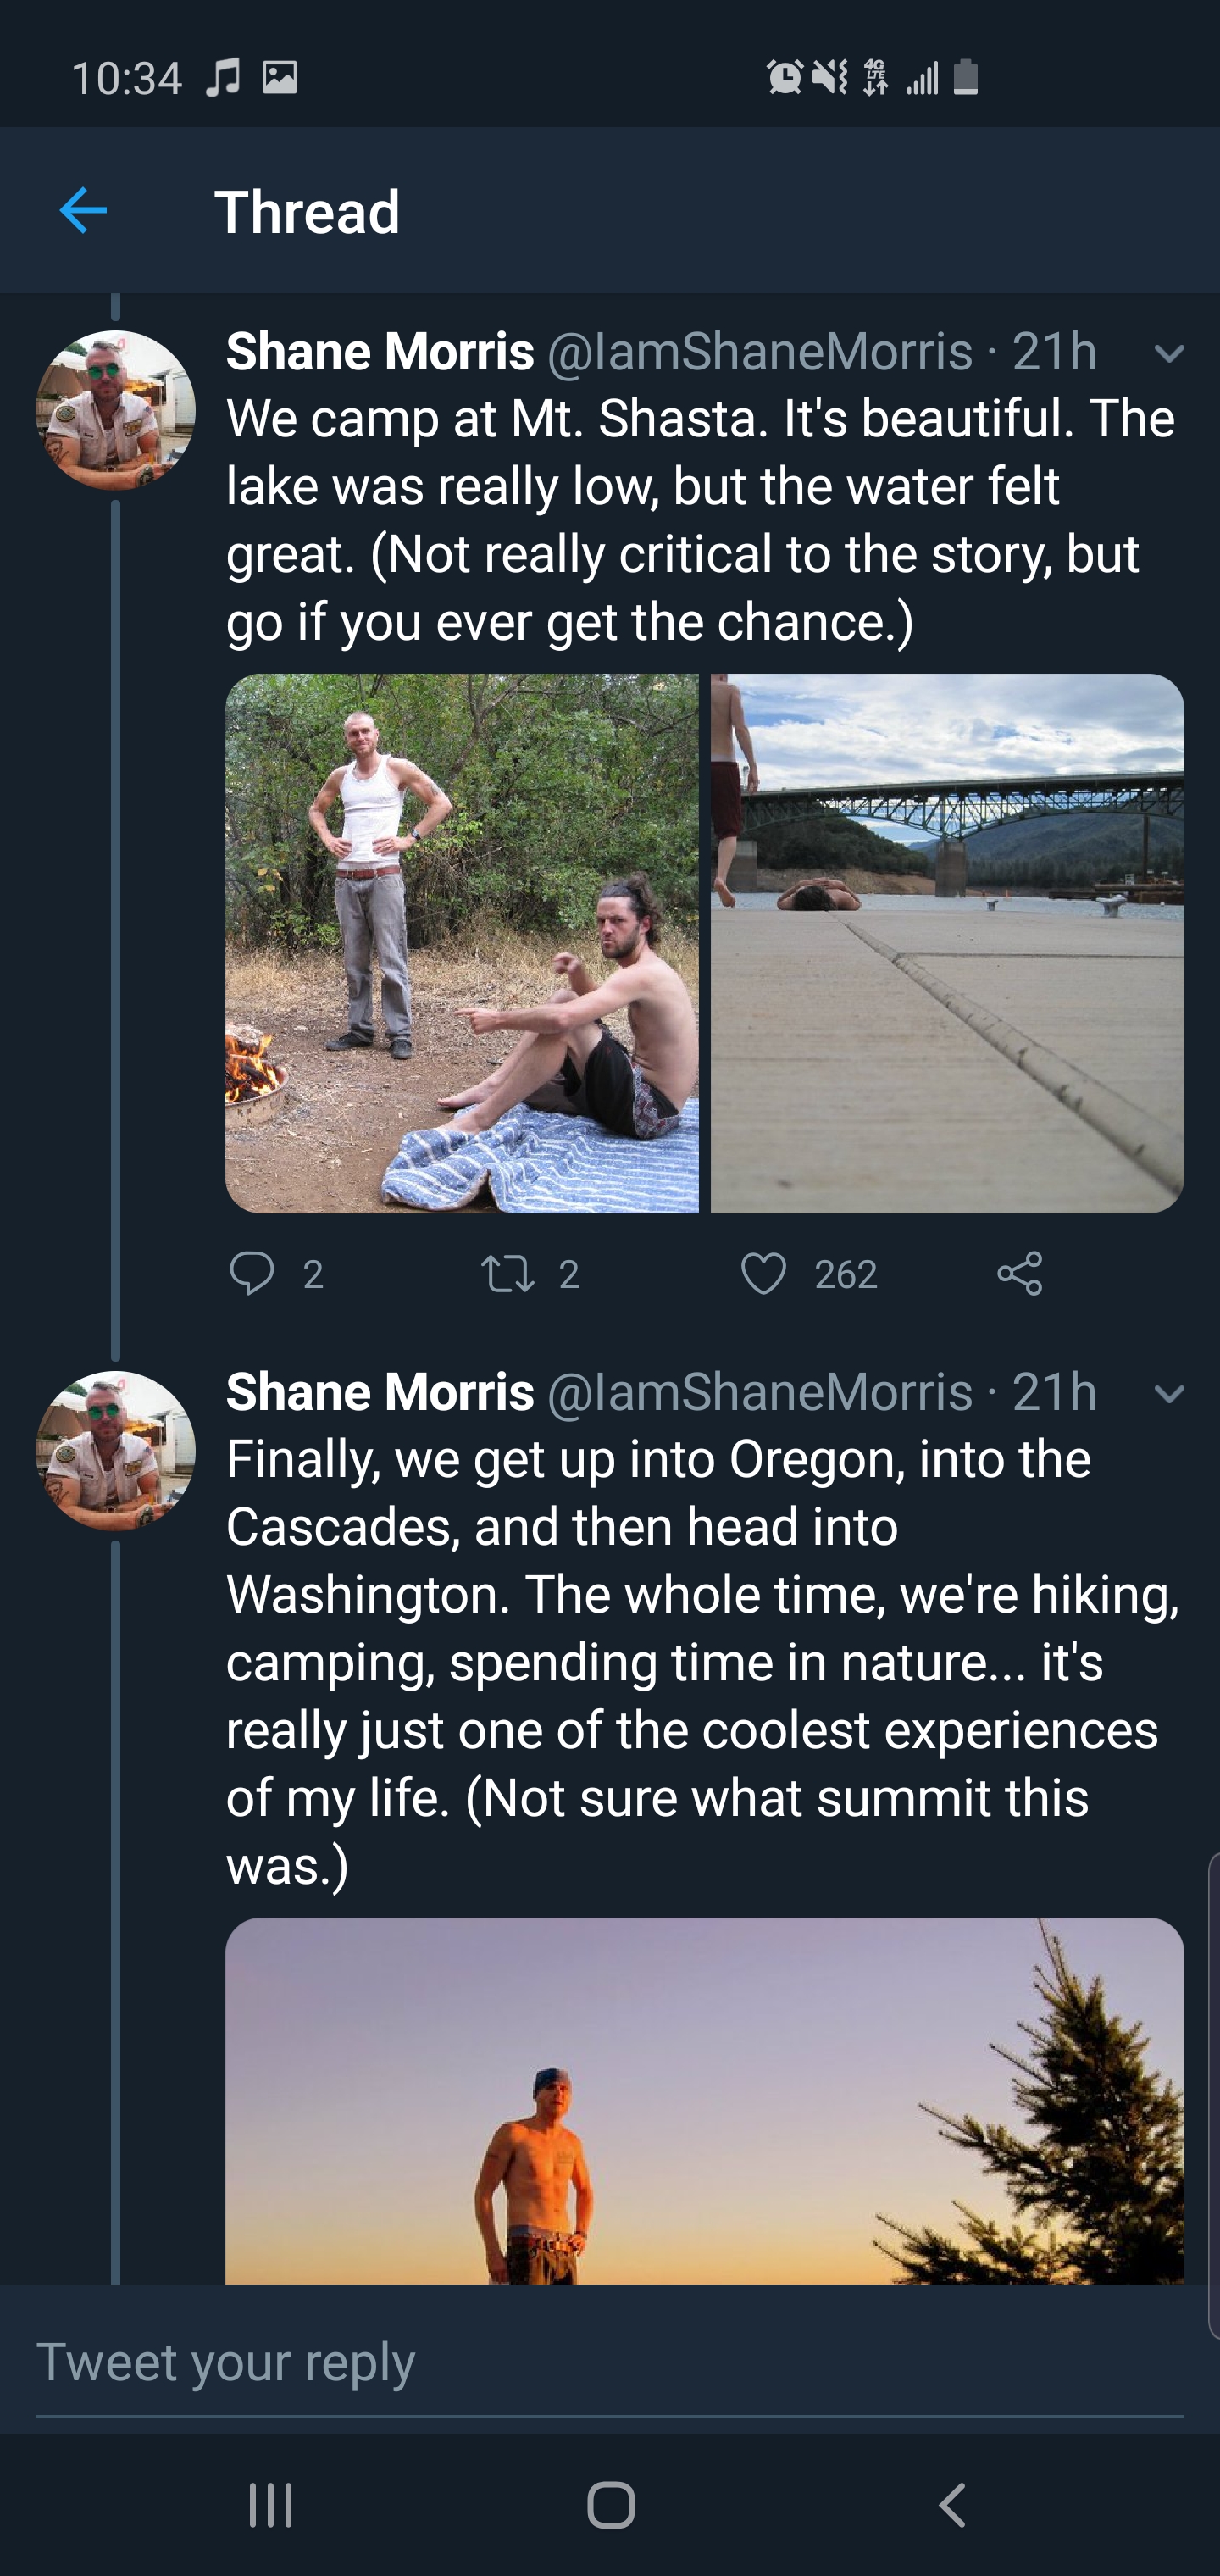 sky - Je On Thread Shane Morris 21h We camp at Mt. Shasta, It's beautiful. The lake was really low, but the water felt great. Not really critical to the story, but go if you ever get the chance. 112 262 Shane Morris 21h Finally, we get up into Oregon, int